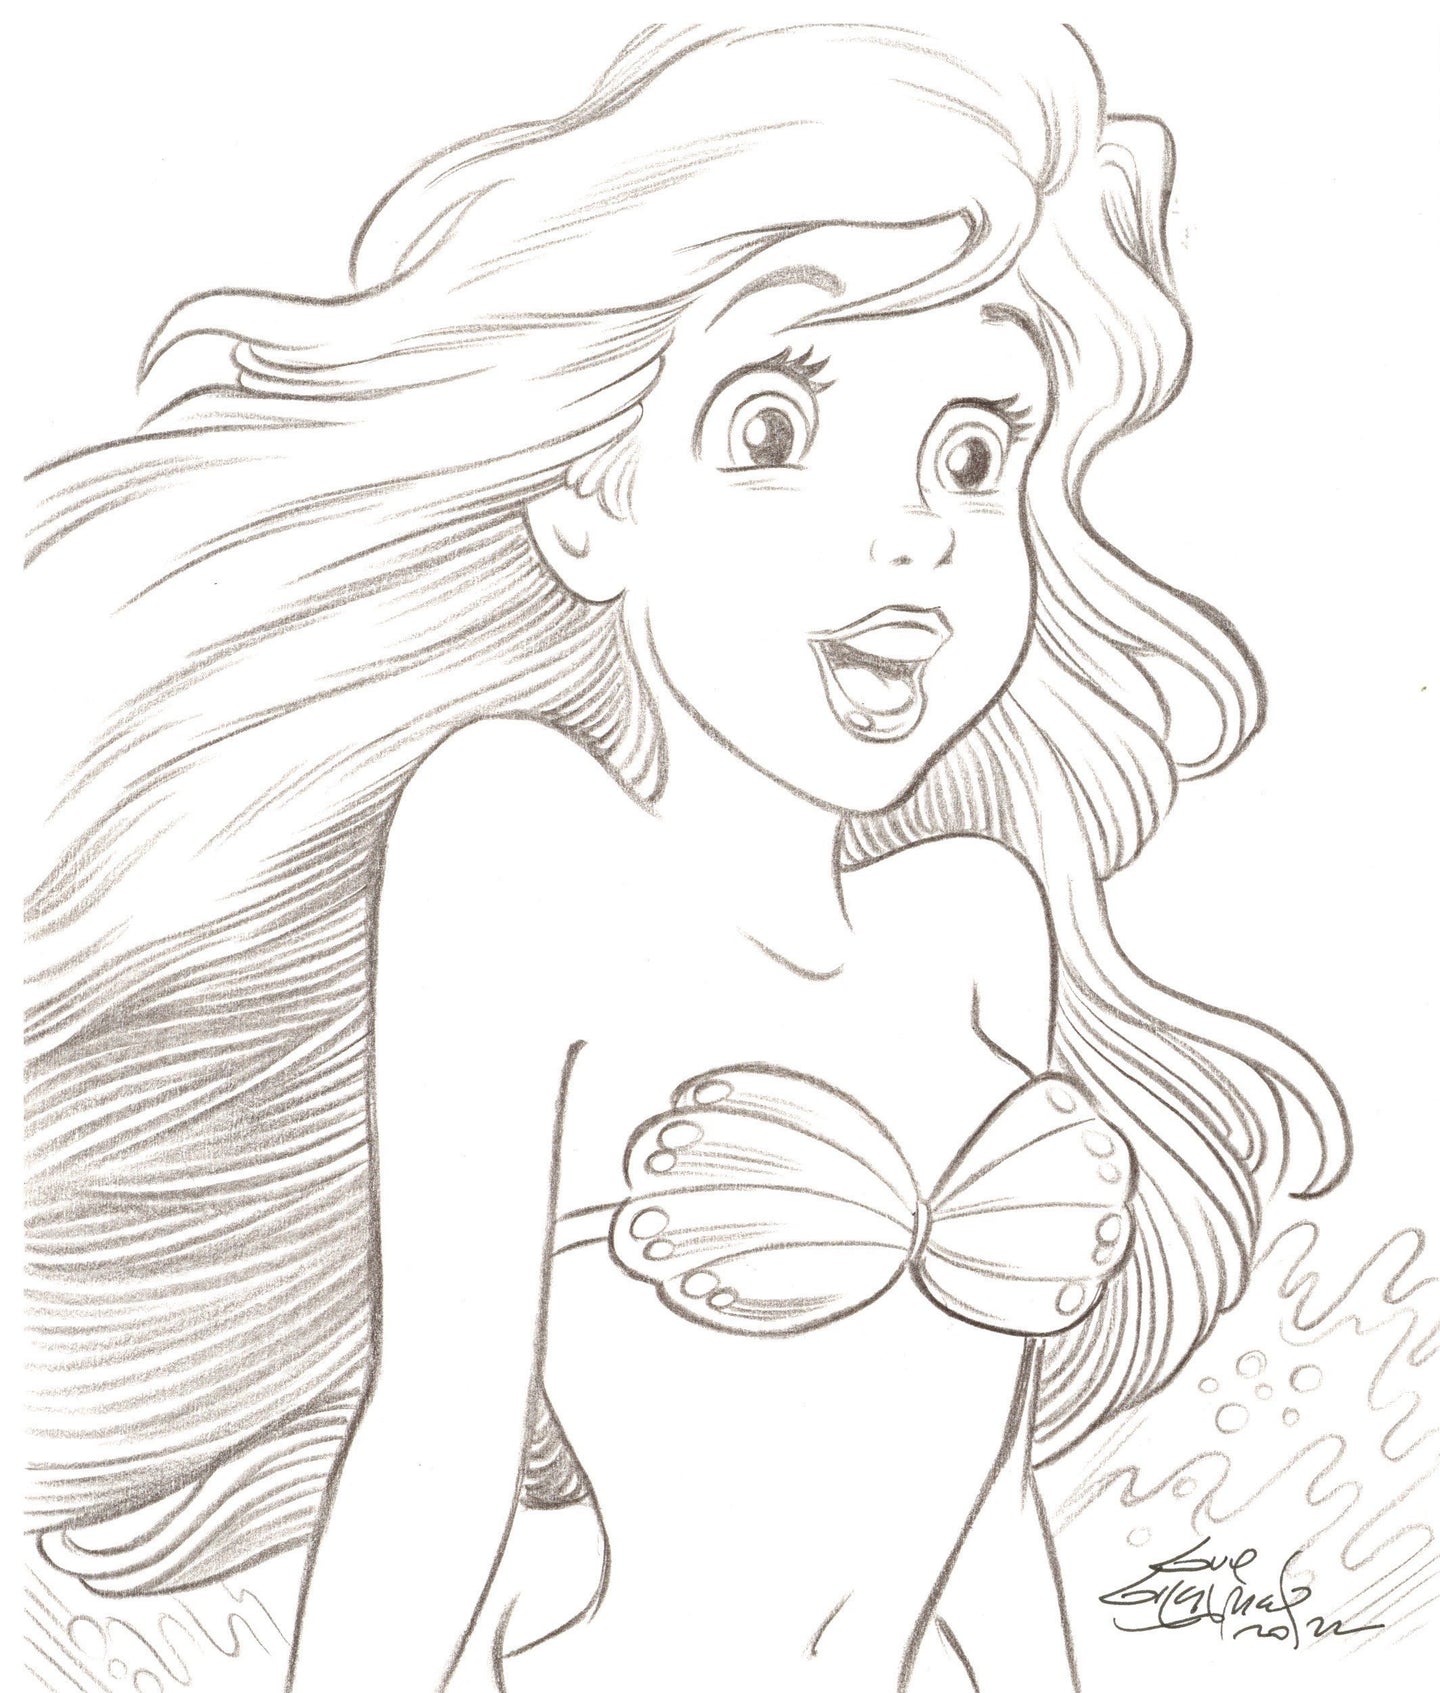 The Little Mermaid Ariel (Outline) Original Art 6x8 Sketch - Created by Guy Gilchrist